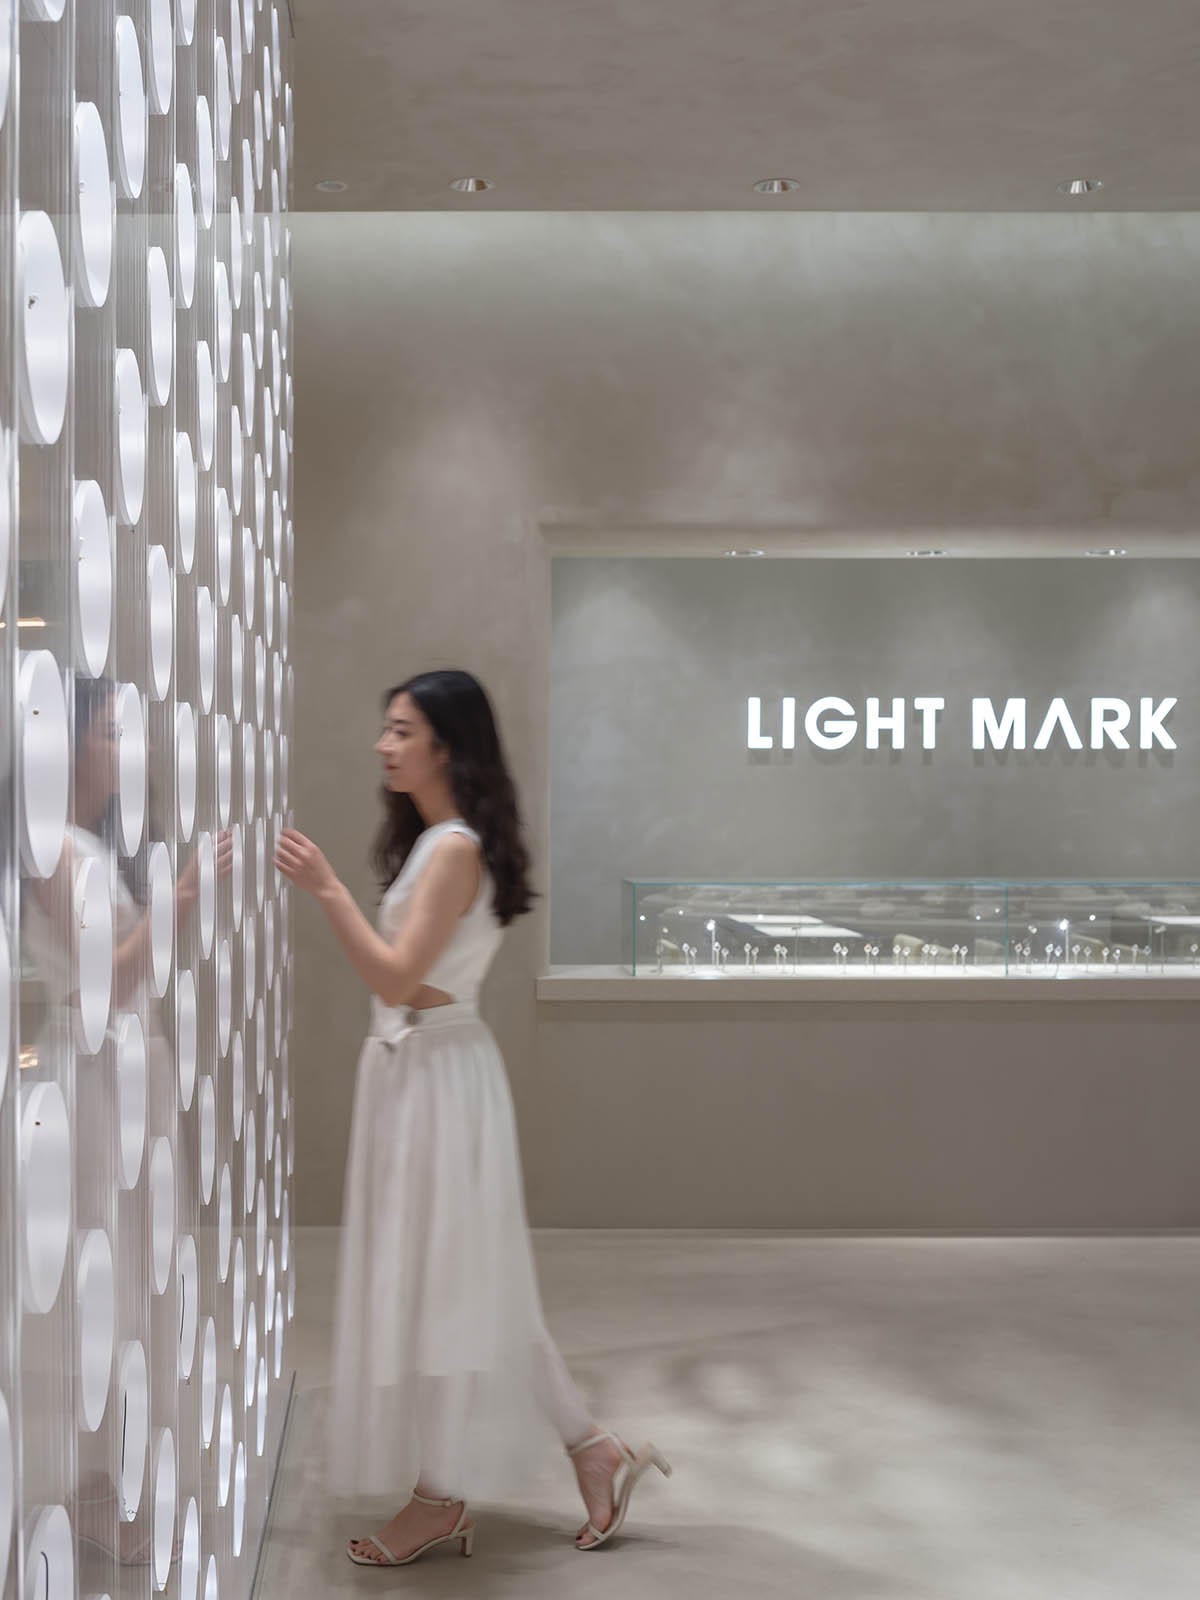 kooo architects add transparent floating halos as a screen at jewelry store in suzhou 